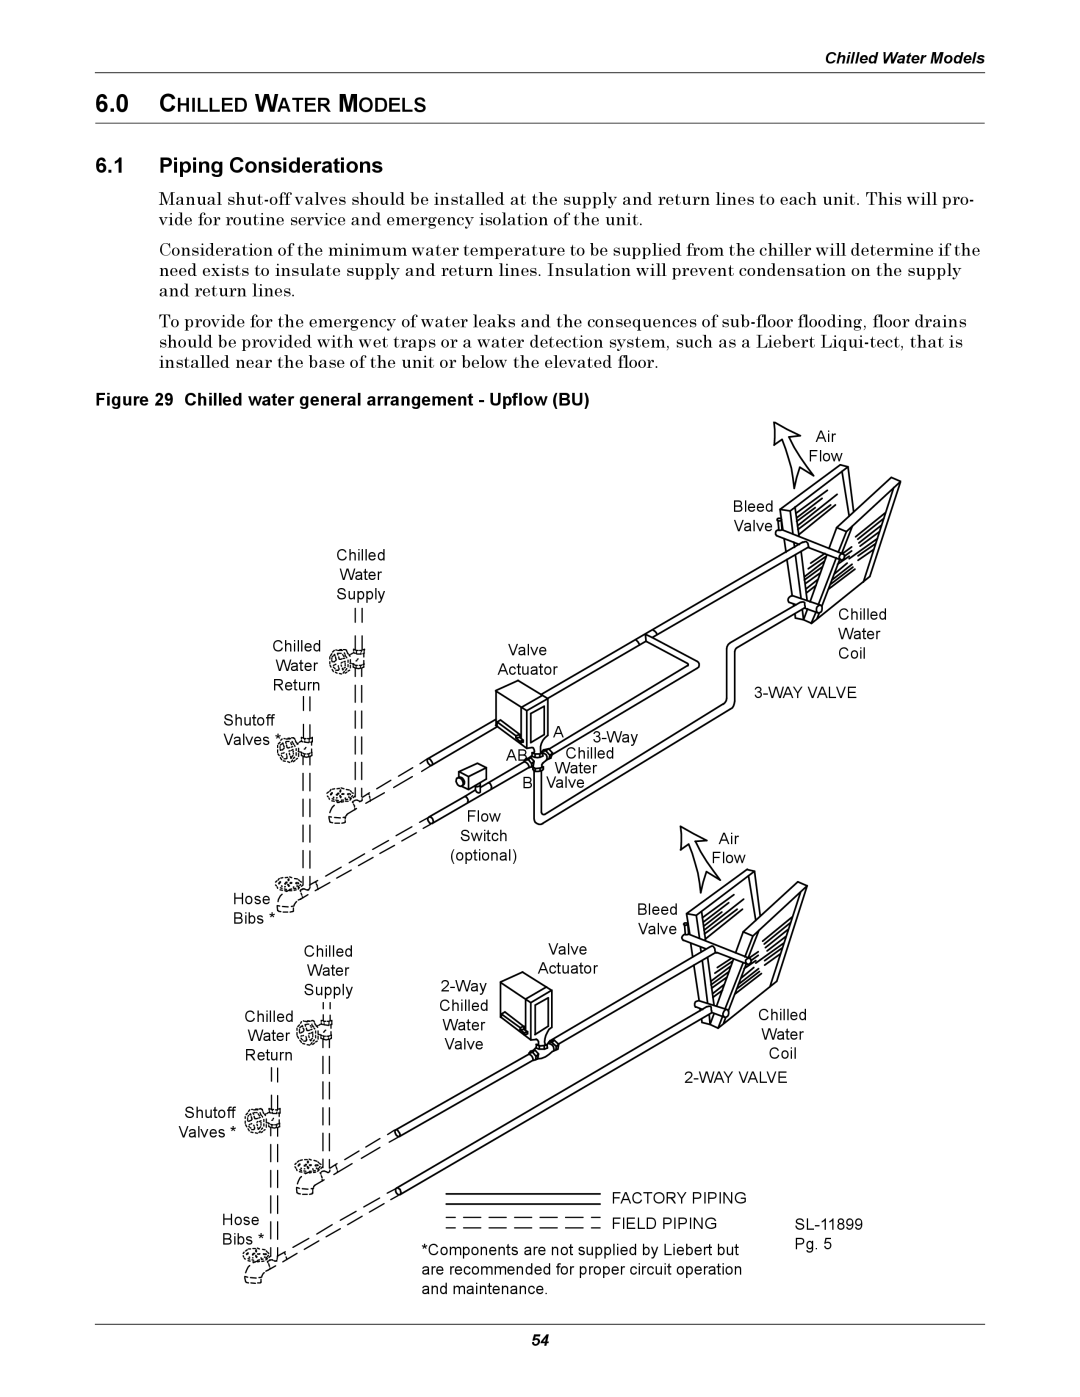 Emerson 3000 installation manual 6.1Piping Considerations, 6.0CHILLED WATER MODELS 